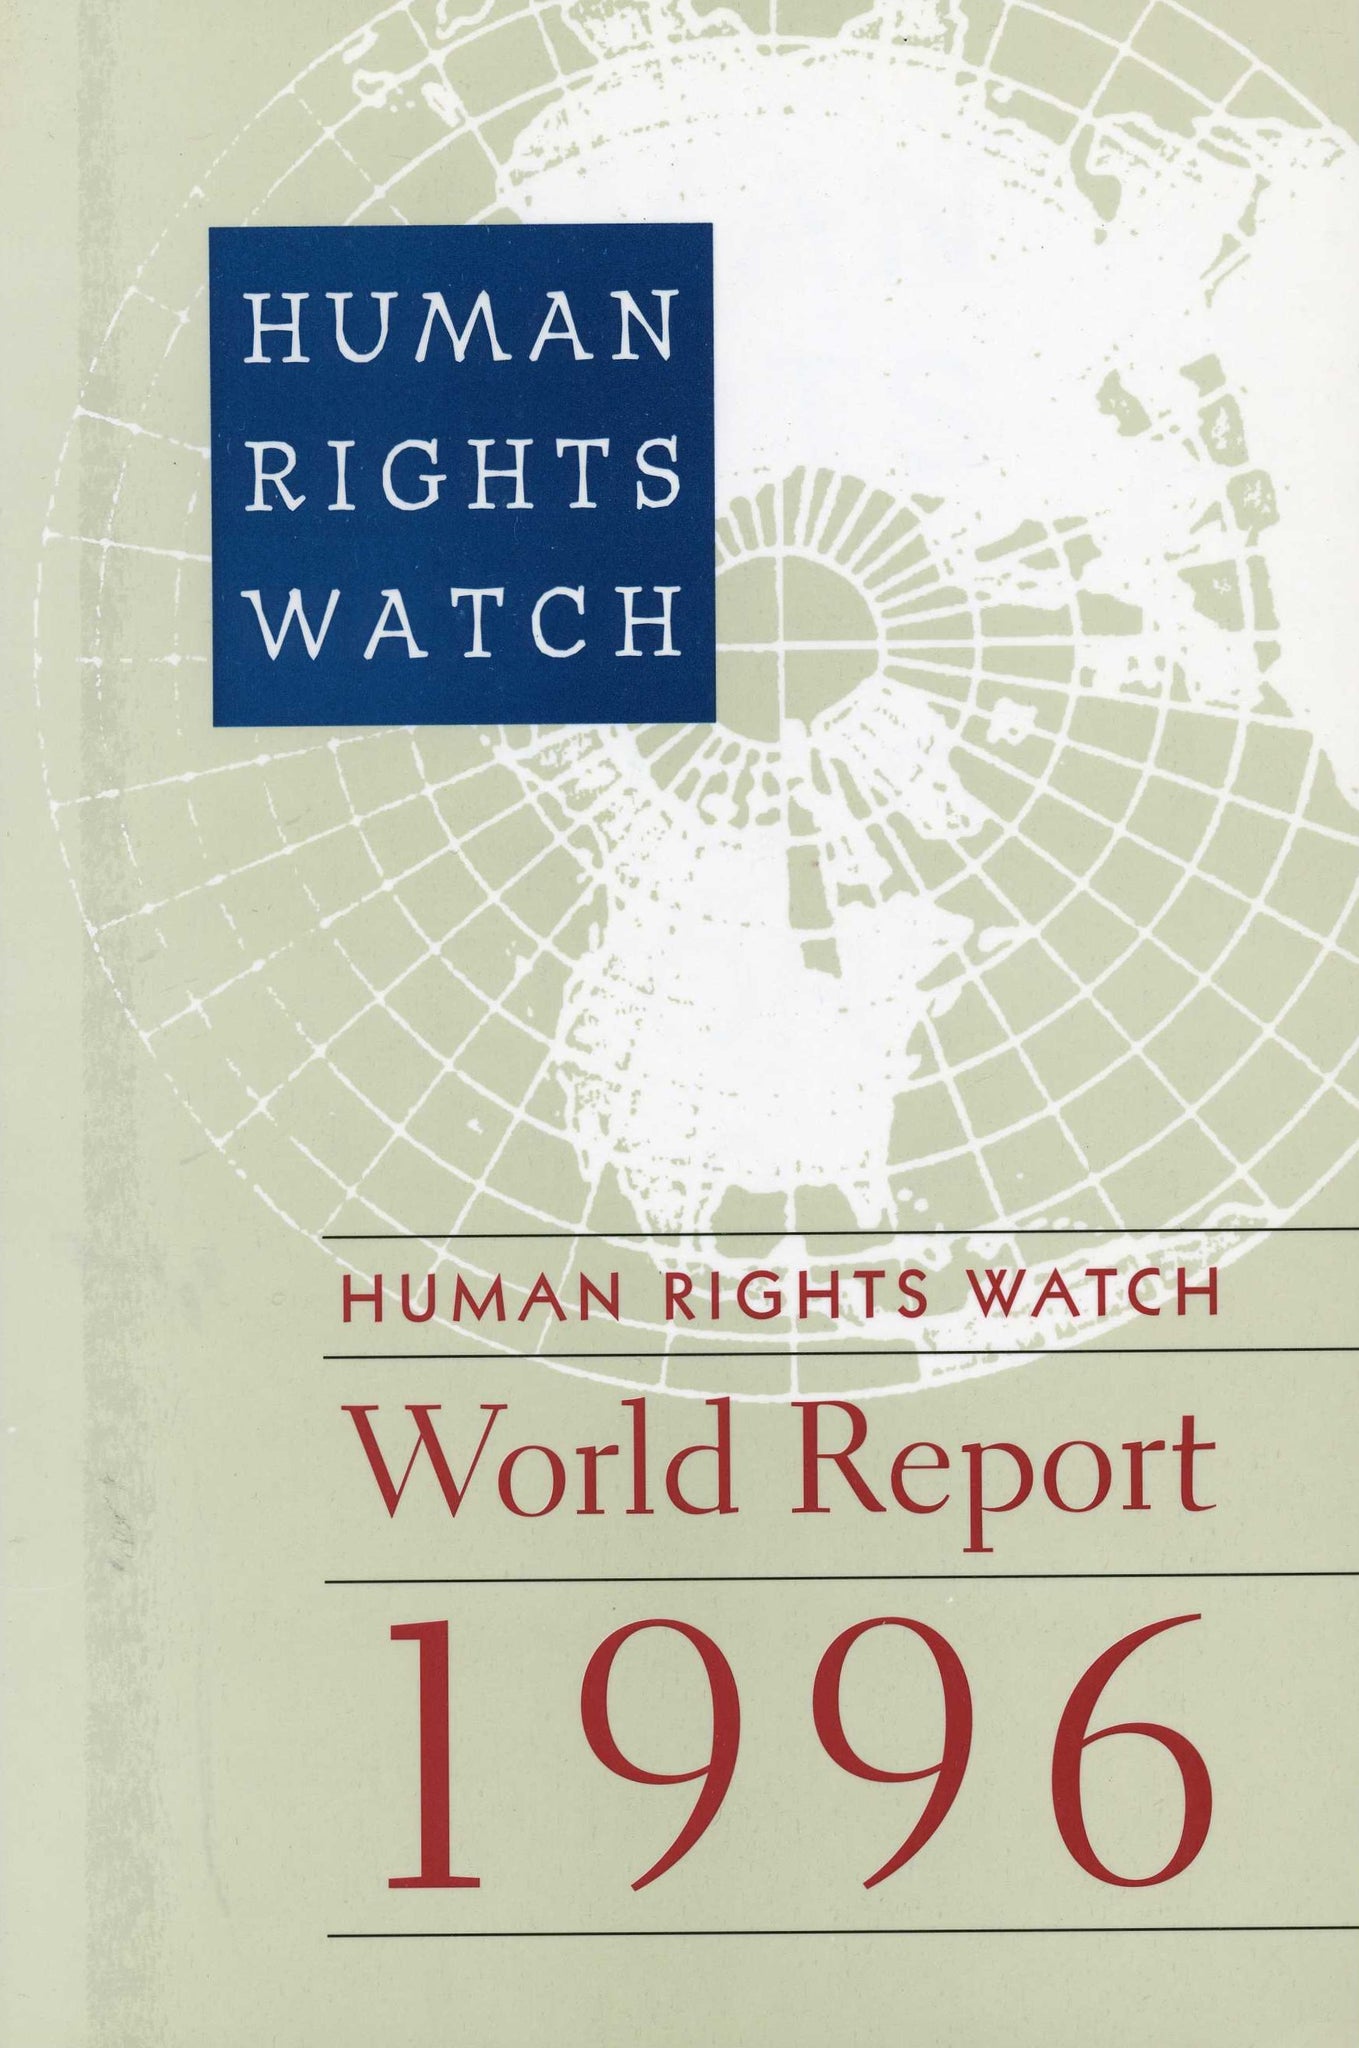 HUMAN RIGHTS WATCH: WORLD REPORT